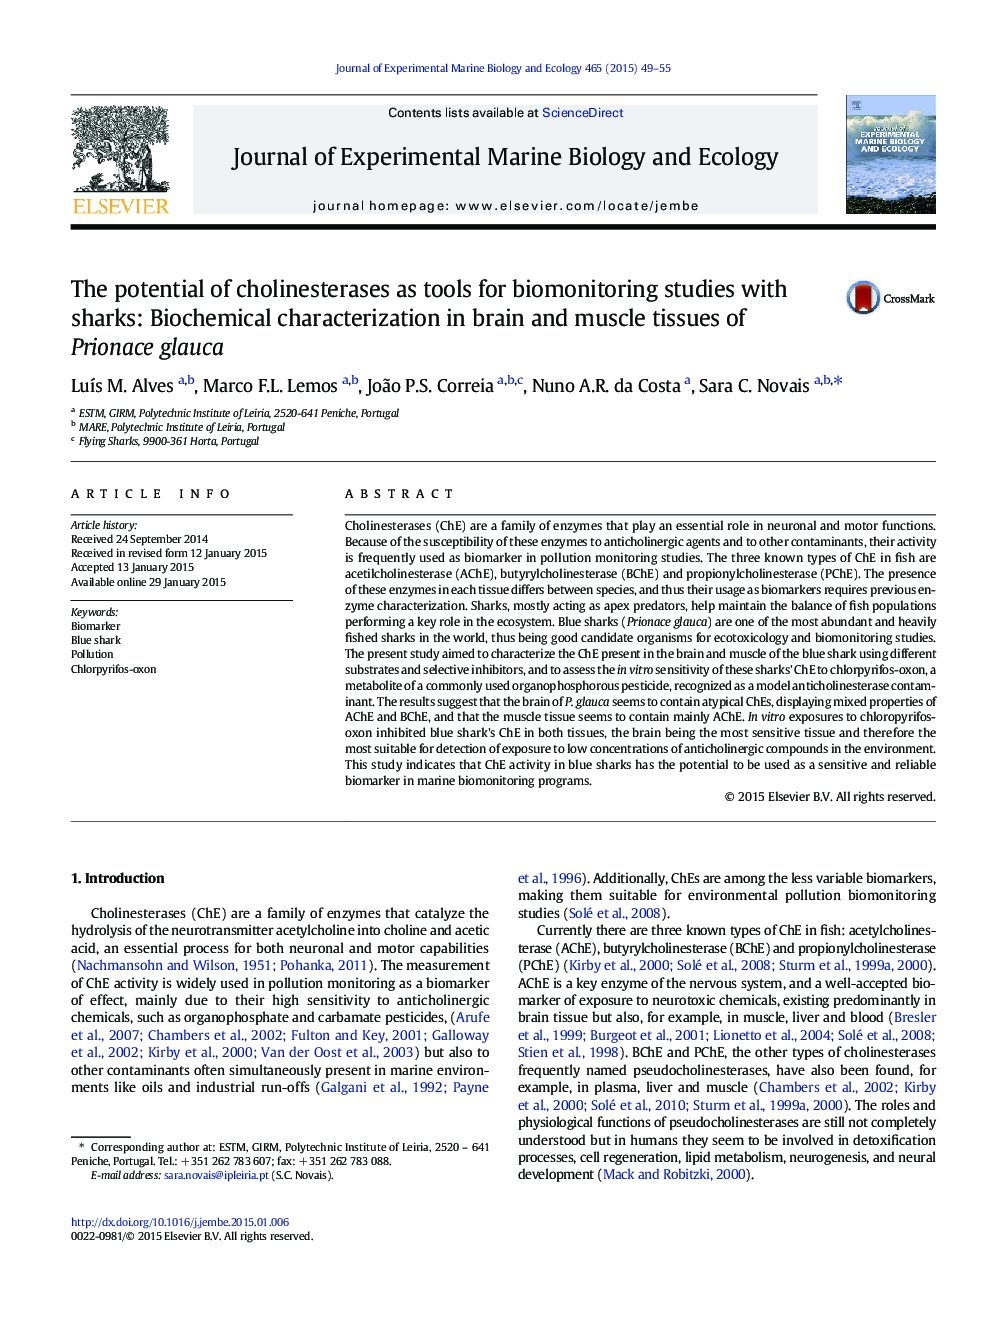 The potential of cholinesterases as tools for biomonitoring studies with sharks: Biochemical characterization in brain and muscle tissues of Prionace glauca